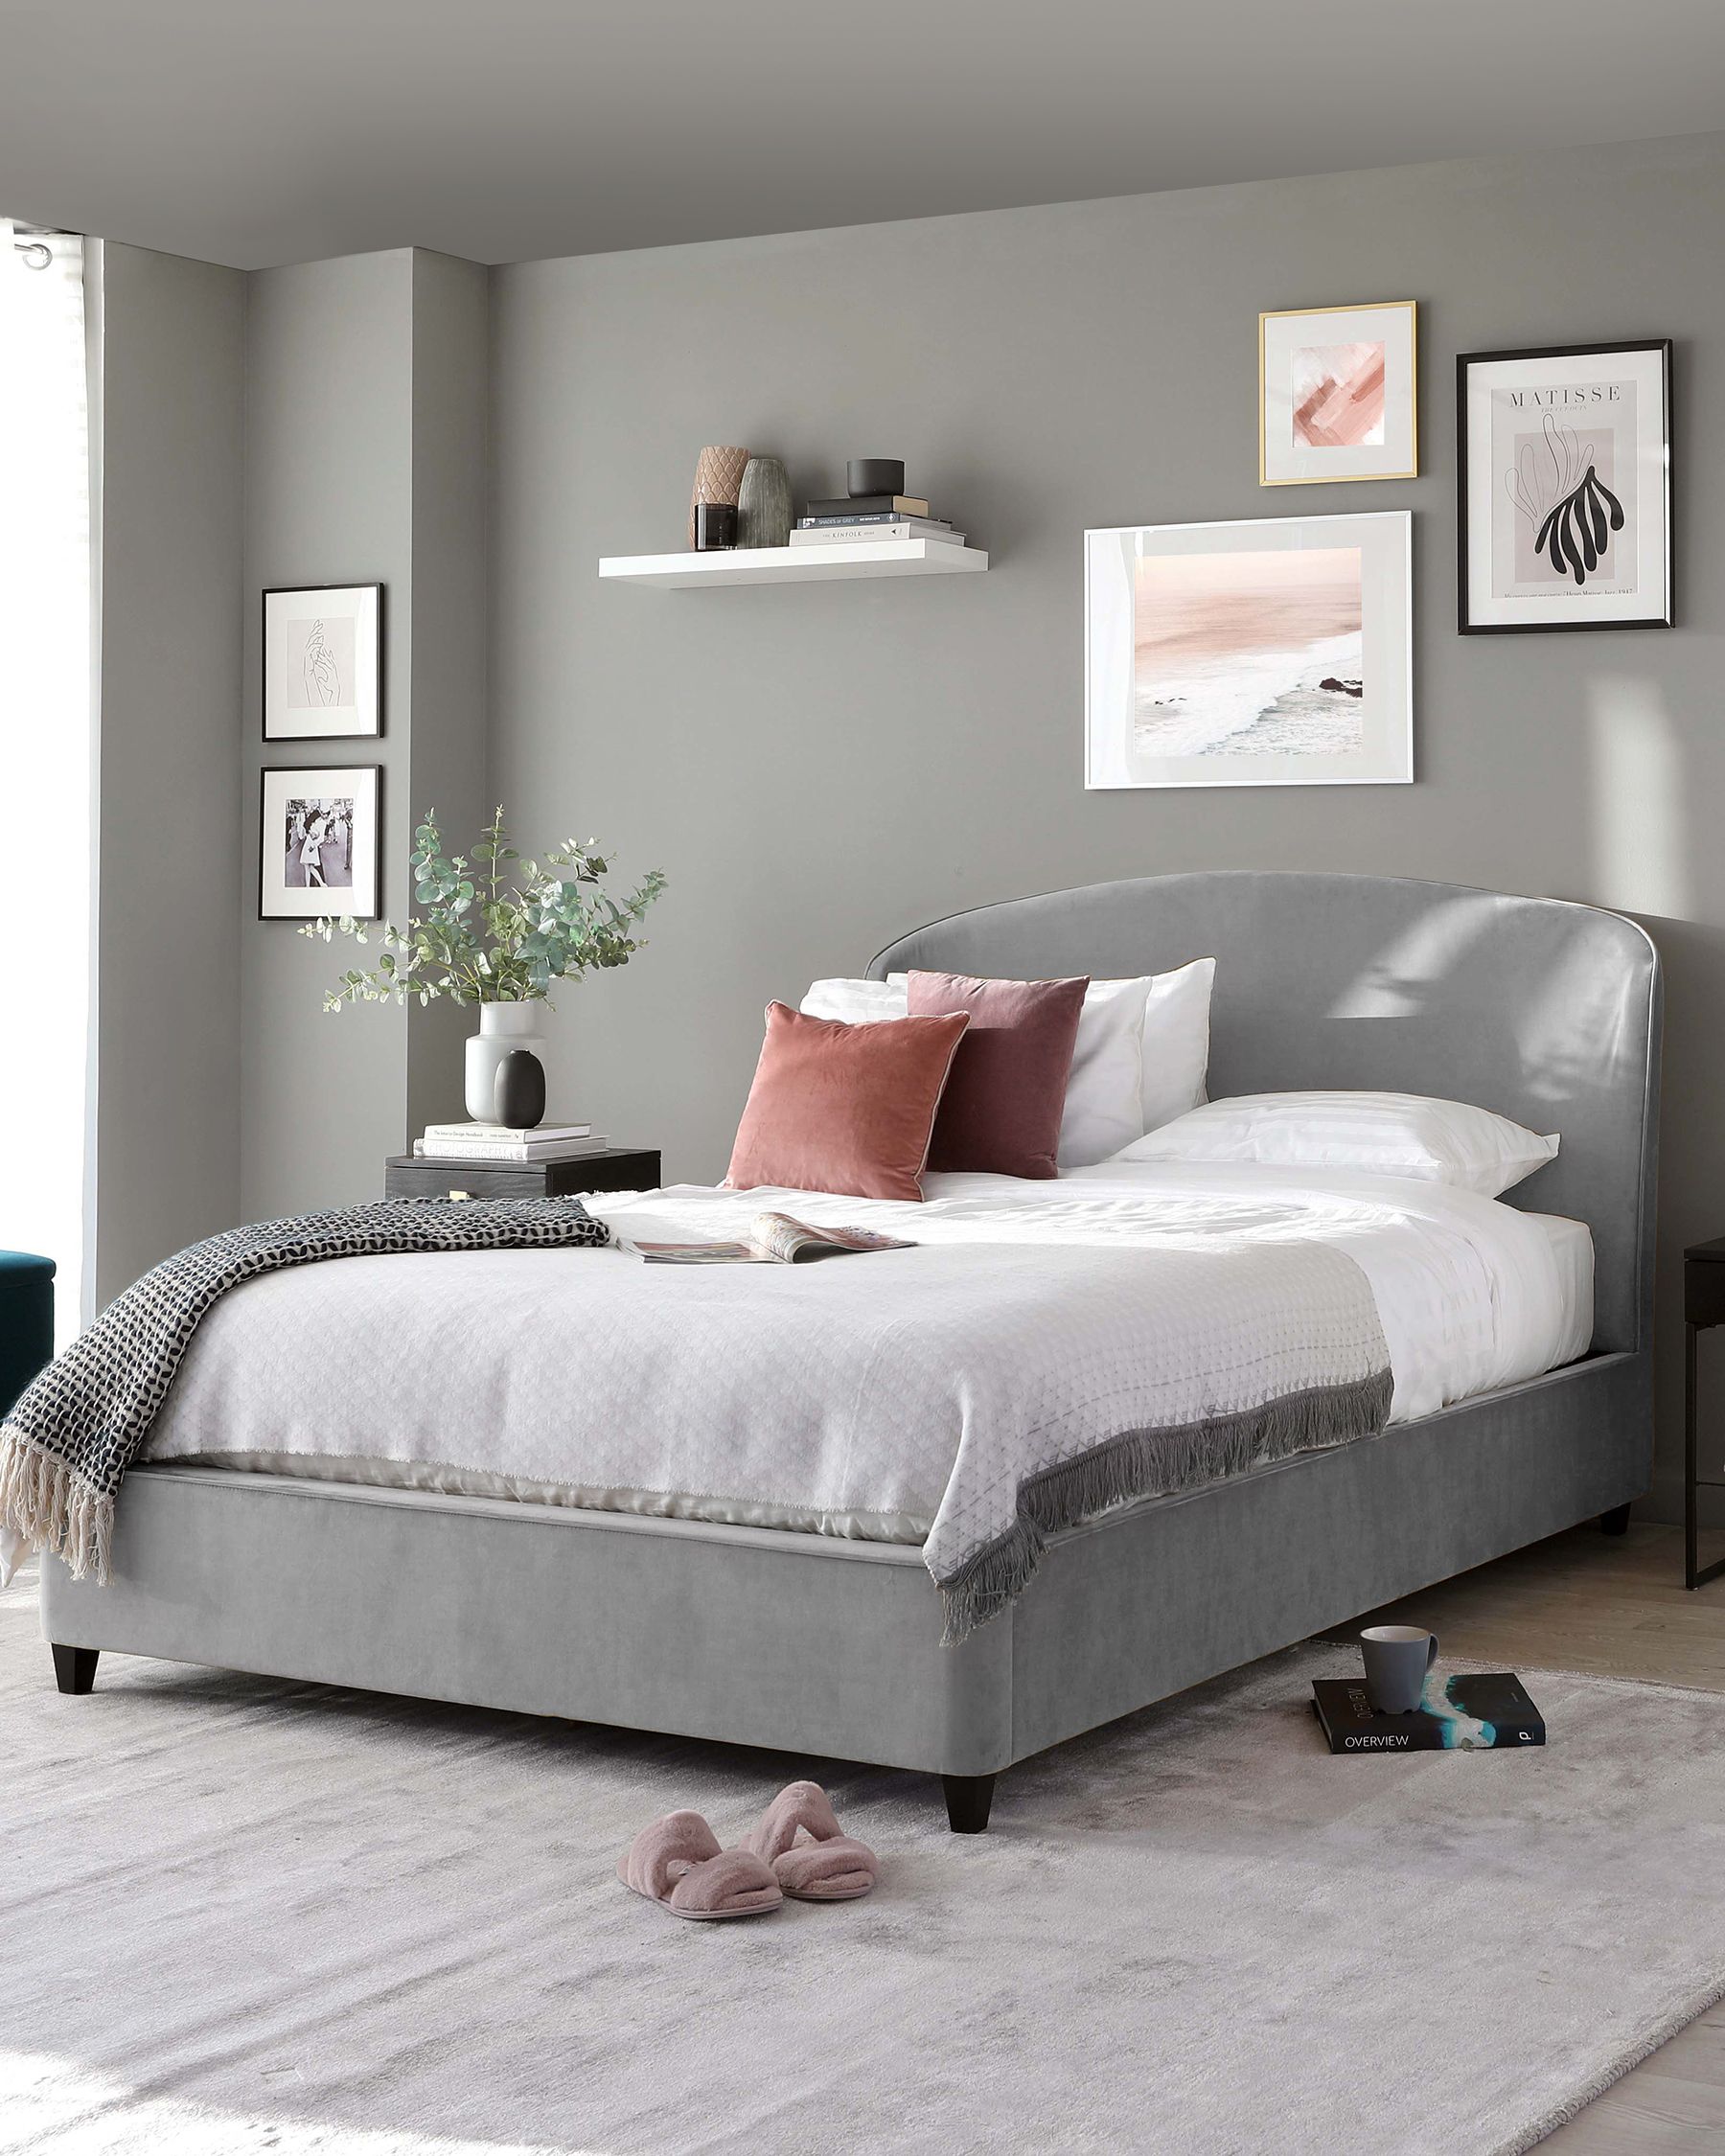 Pink And Grey Bedroom Inspiration - Grey And Pink Bedroom Ideas